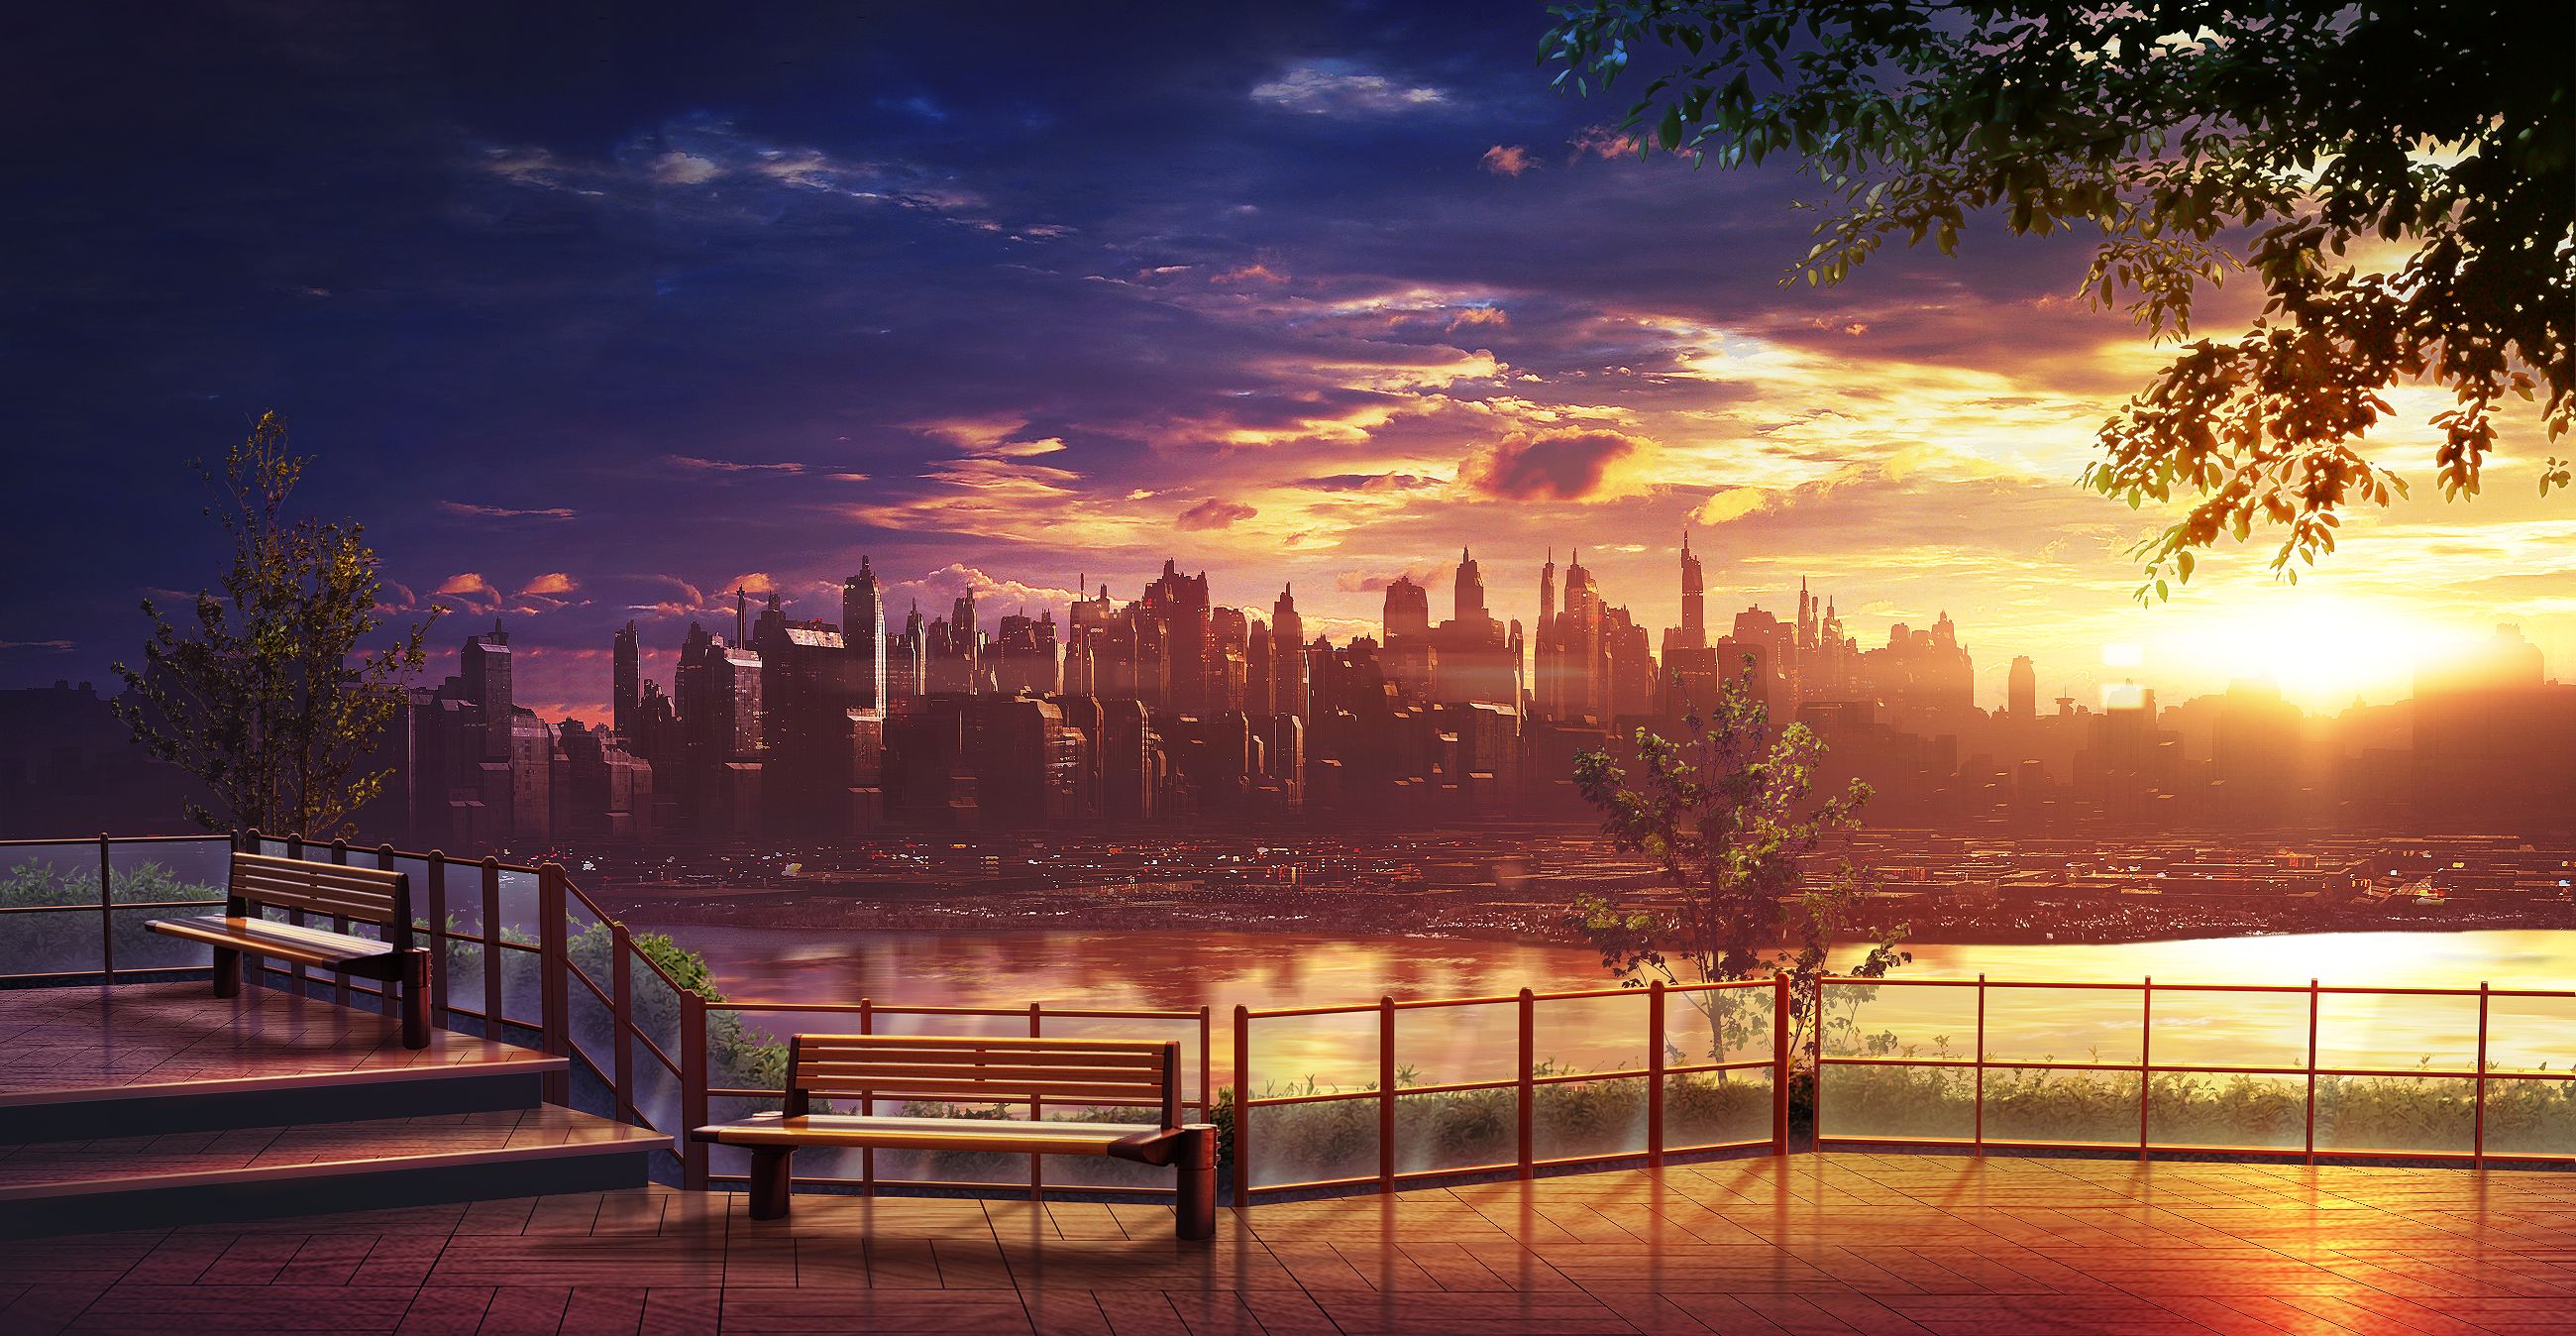 lake, stairs, sky, evening, anime, city, bench, cloud, parc, sunset 8K